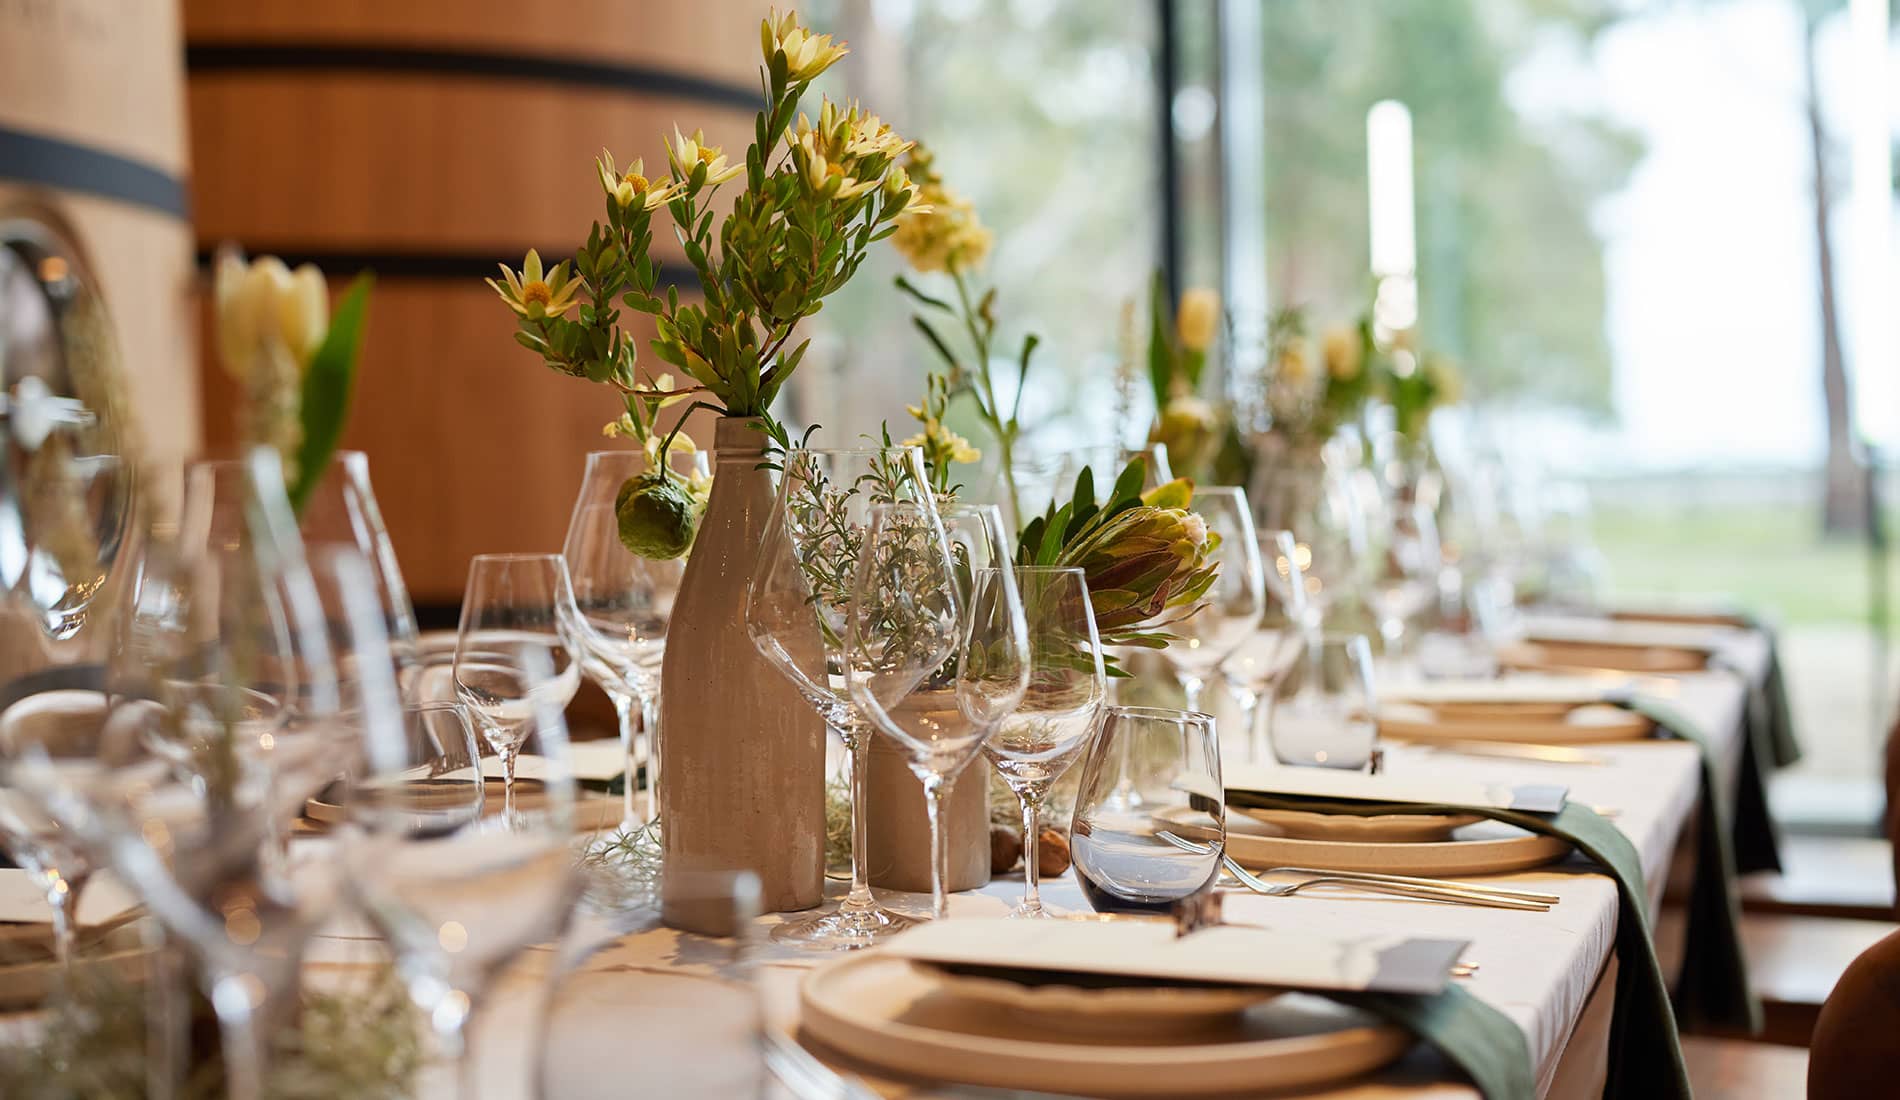 A long table set with flowers in vases and wooden wine vats in the background